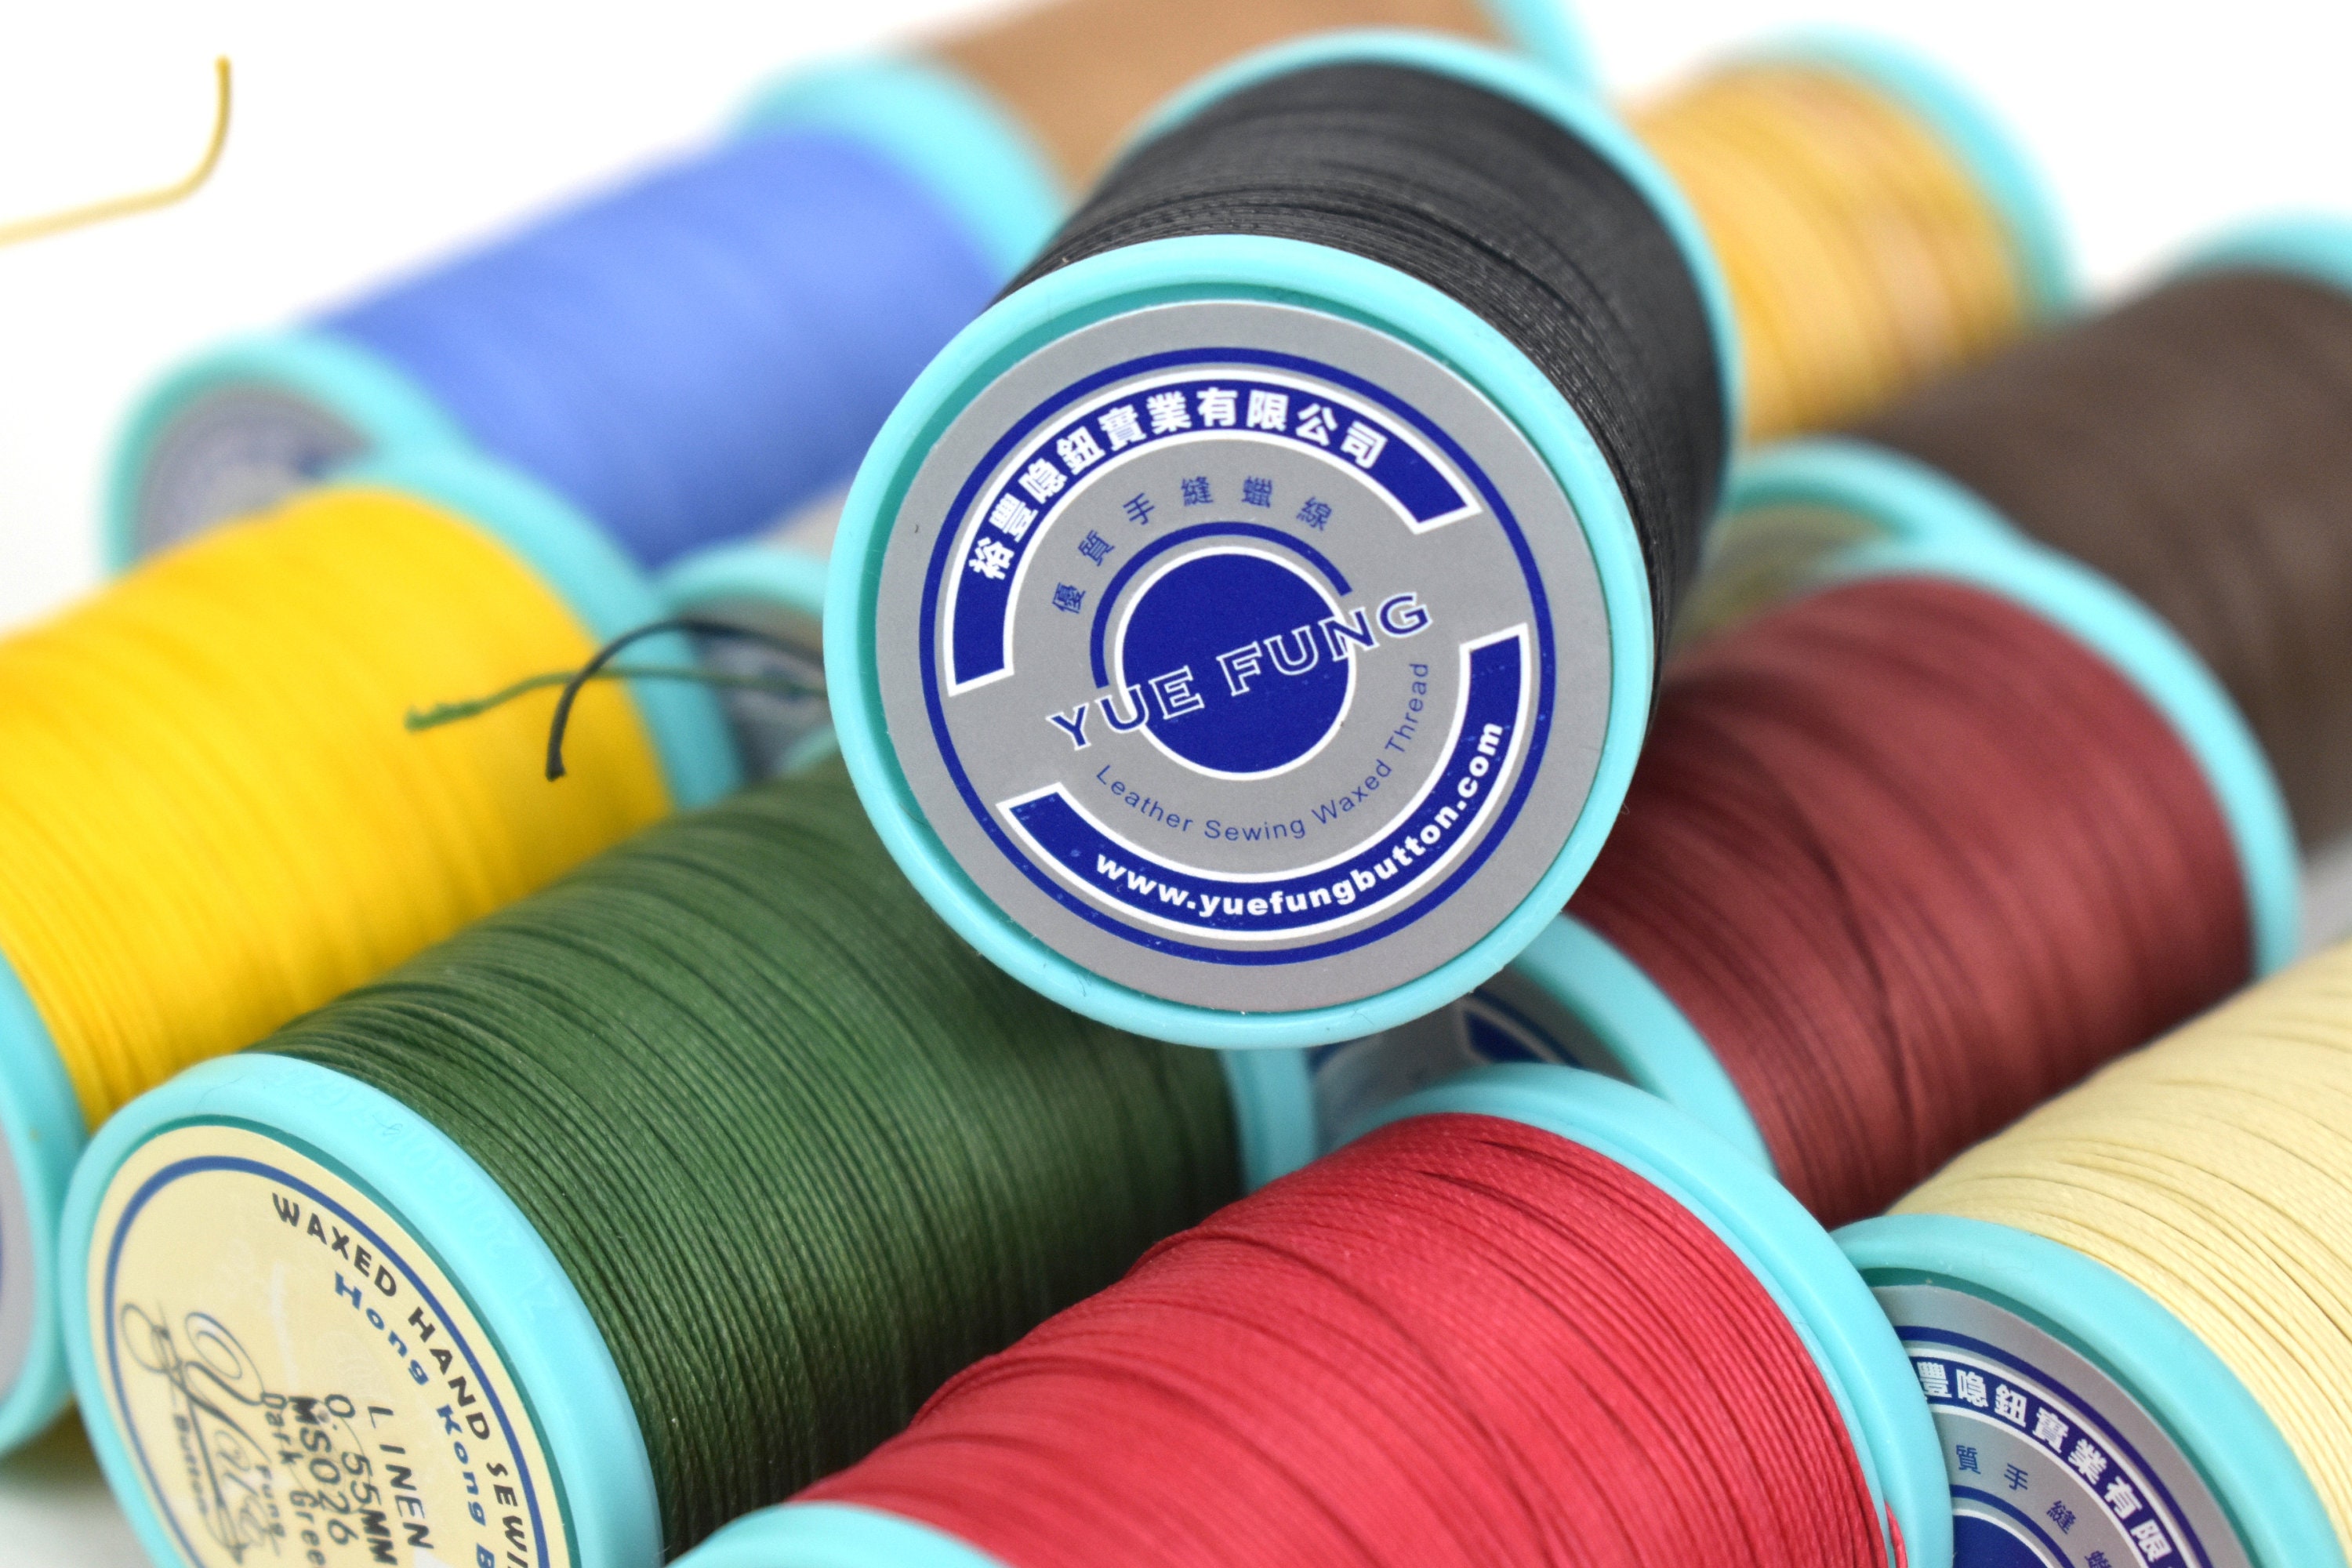 28 Colors 0.45mm Waxed Thread, Color Leather Thread, 480 Yards per Color Leather  Sewing Thread Hand Stitching Thread for Hand Sewing Leather -  Hong Kong